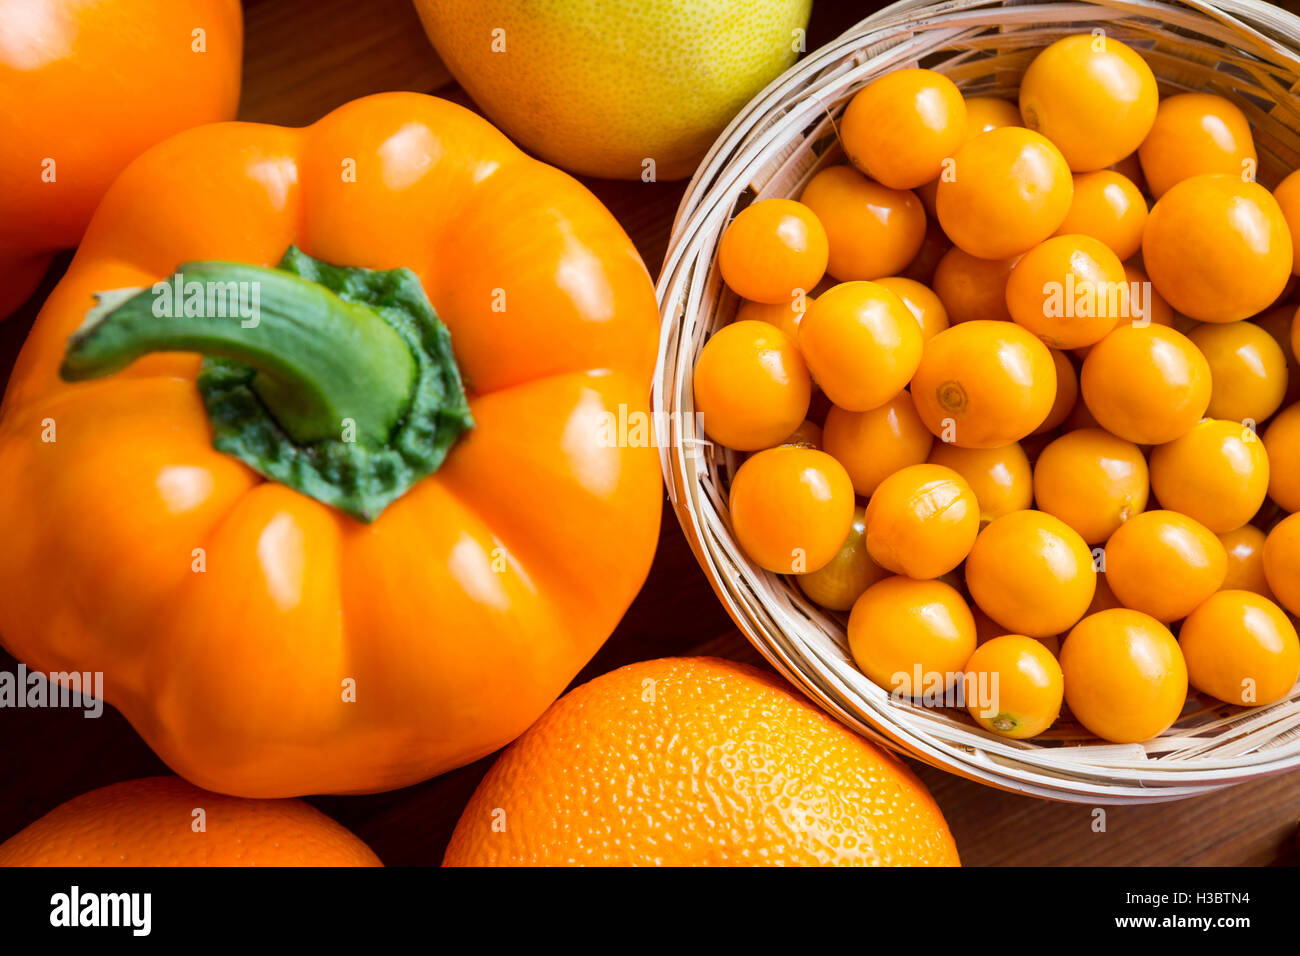 Close-up of cherry tomatoes, bell pepper and oranges Stock Photo